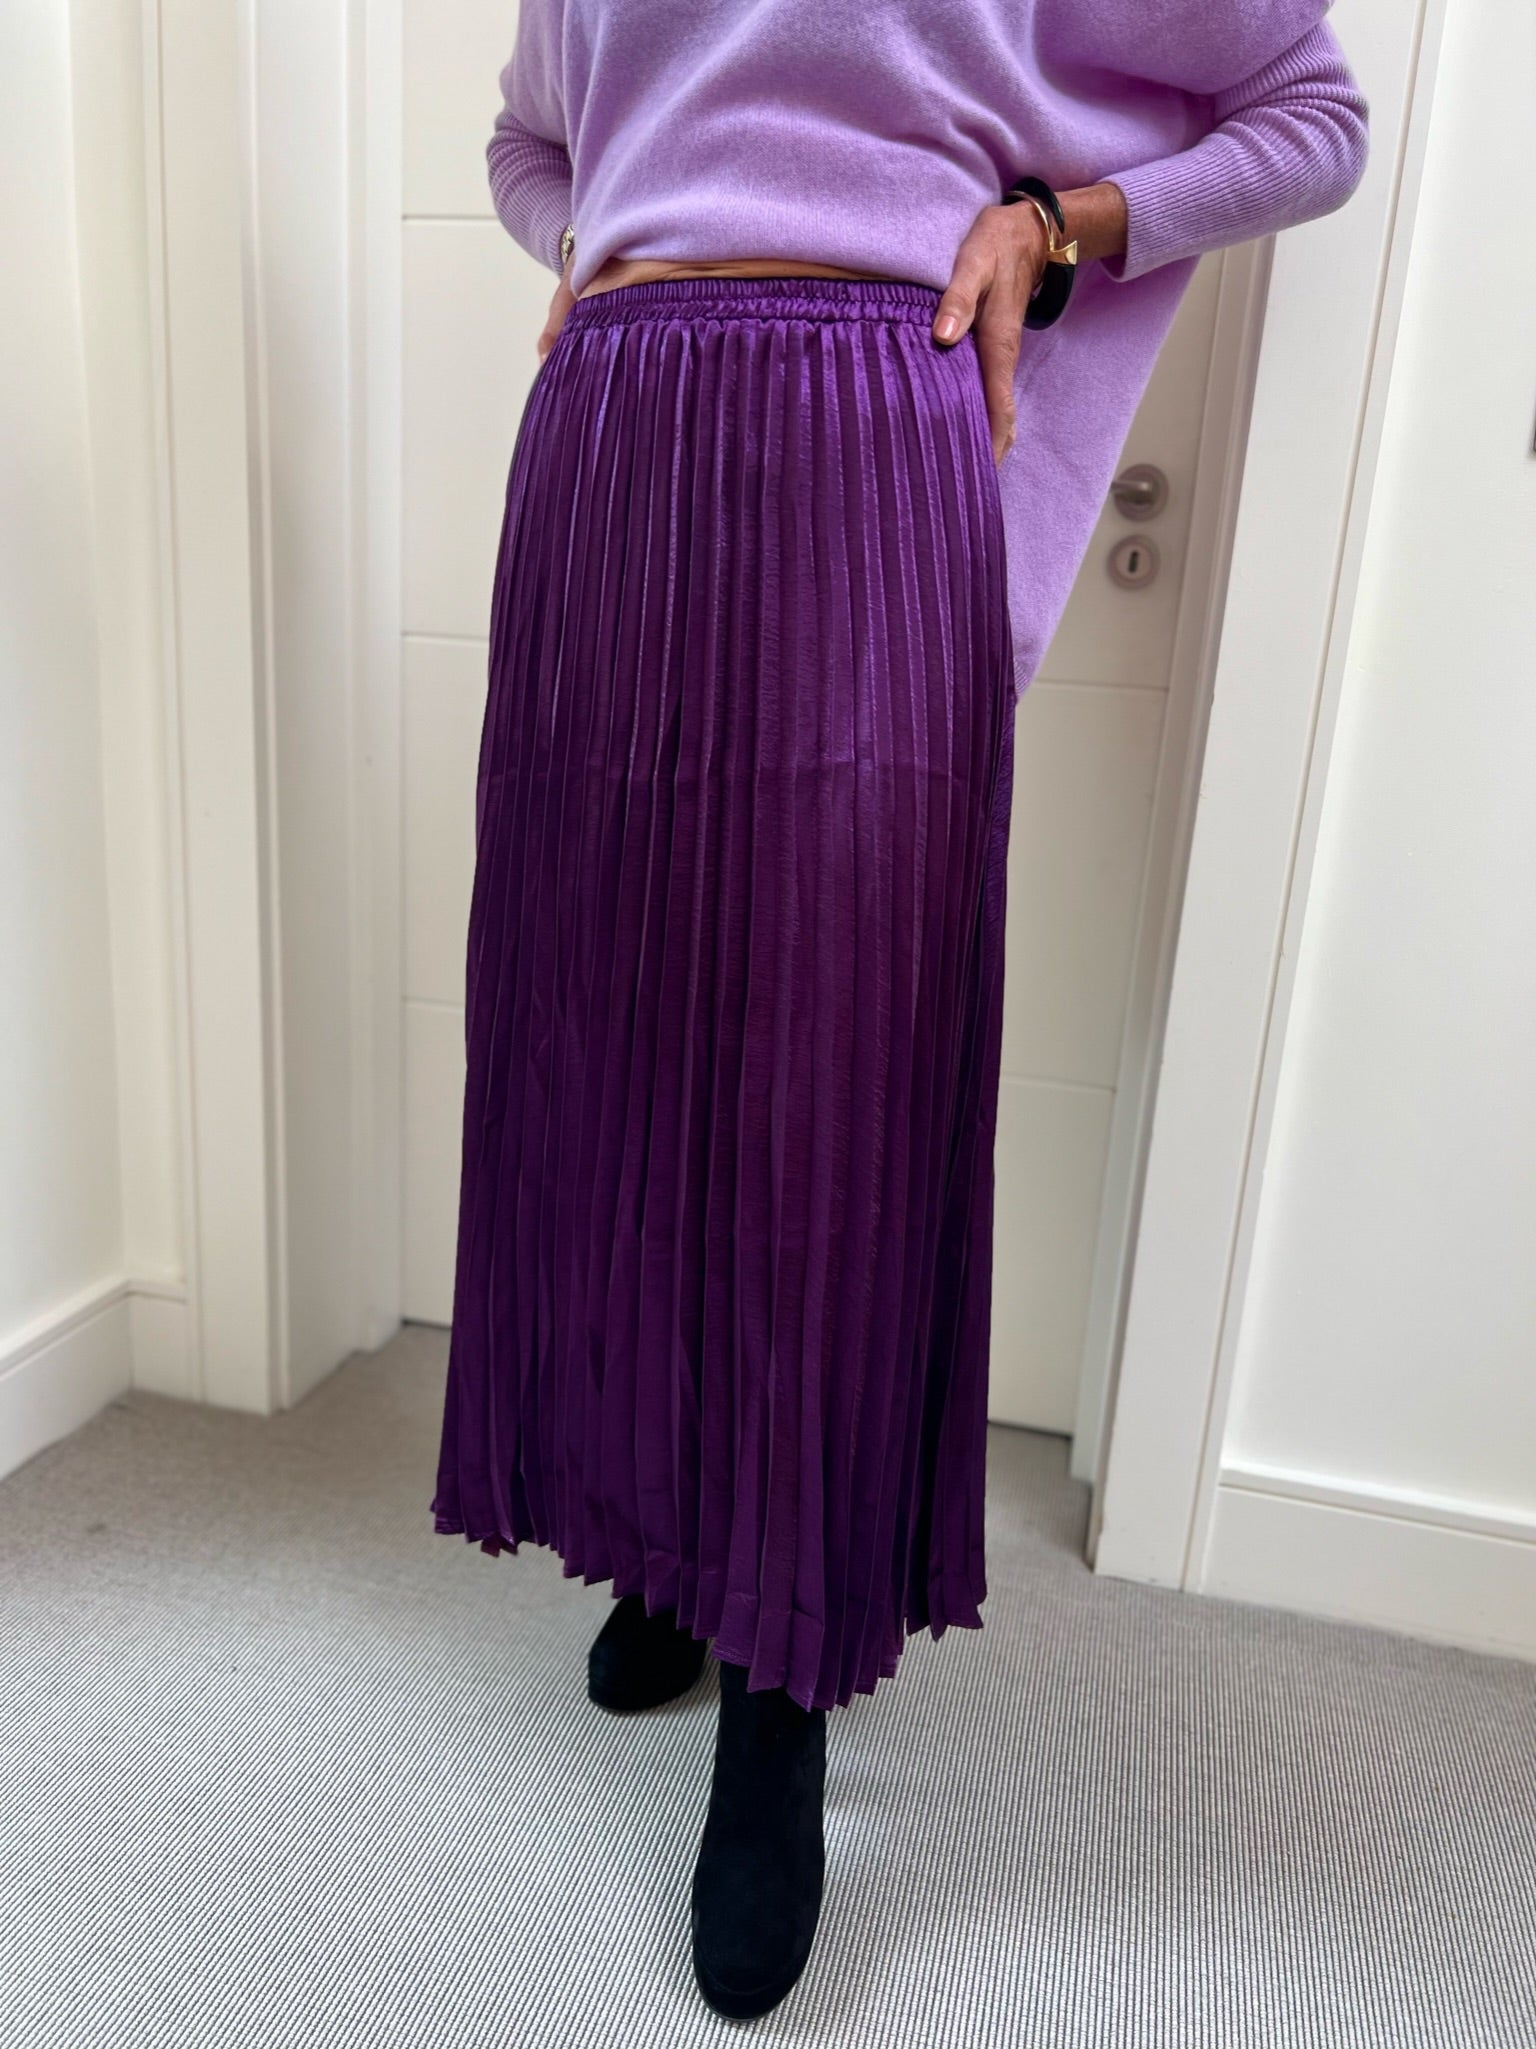 Diffusion.ie Skirt Ange Kelly Pleated Long Satin Skirt in Purple Berry